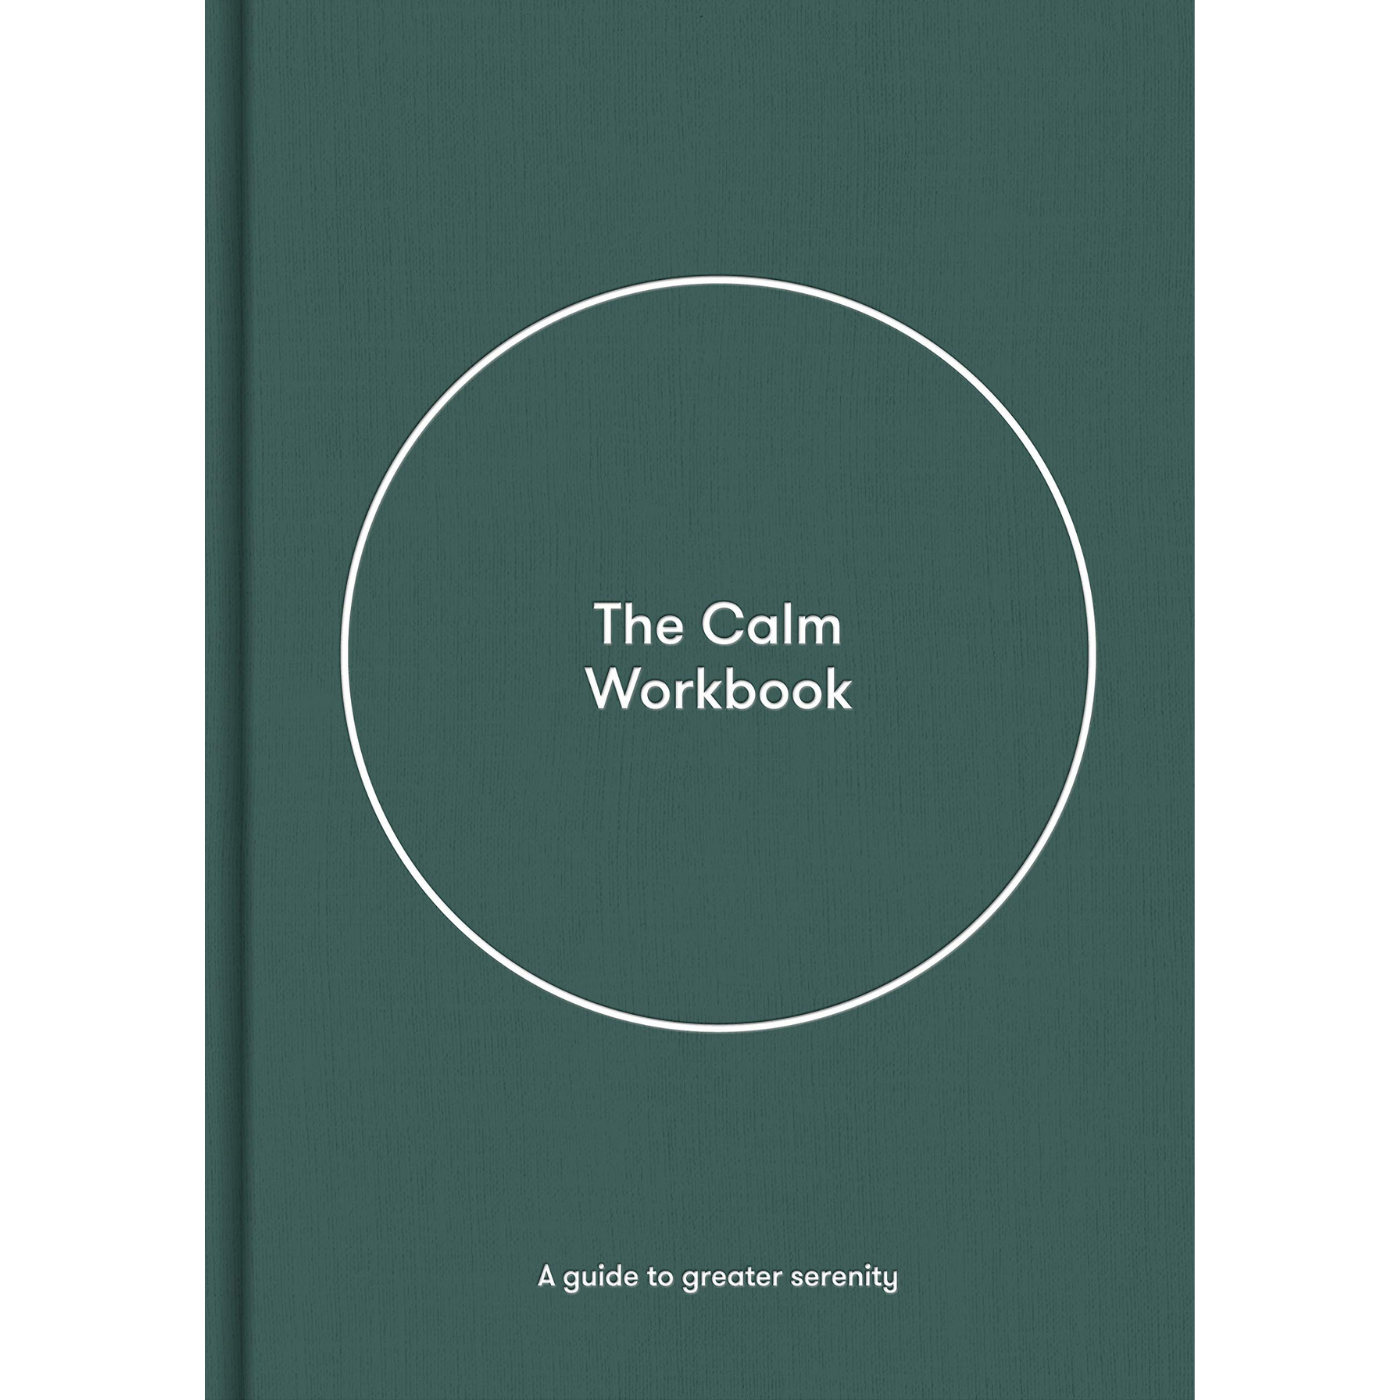 The Calm Workbook: A Guide Greater Serenity